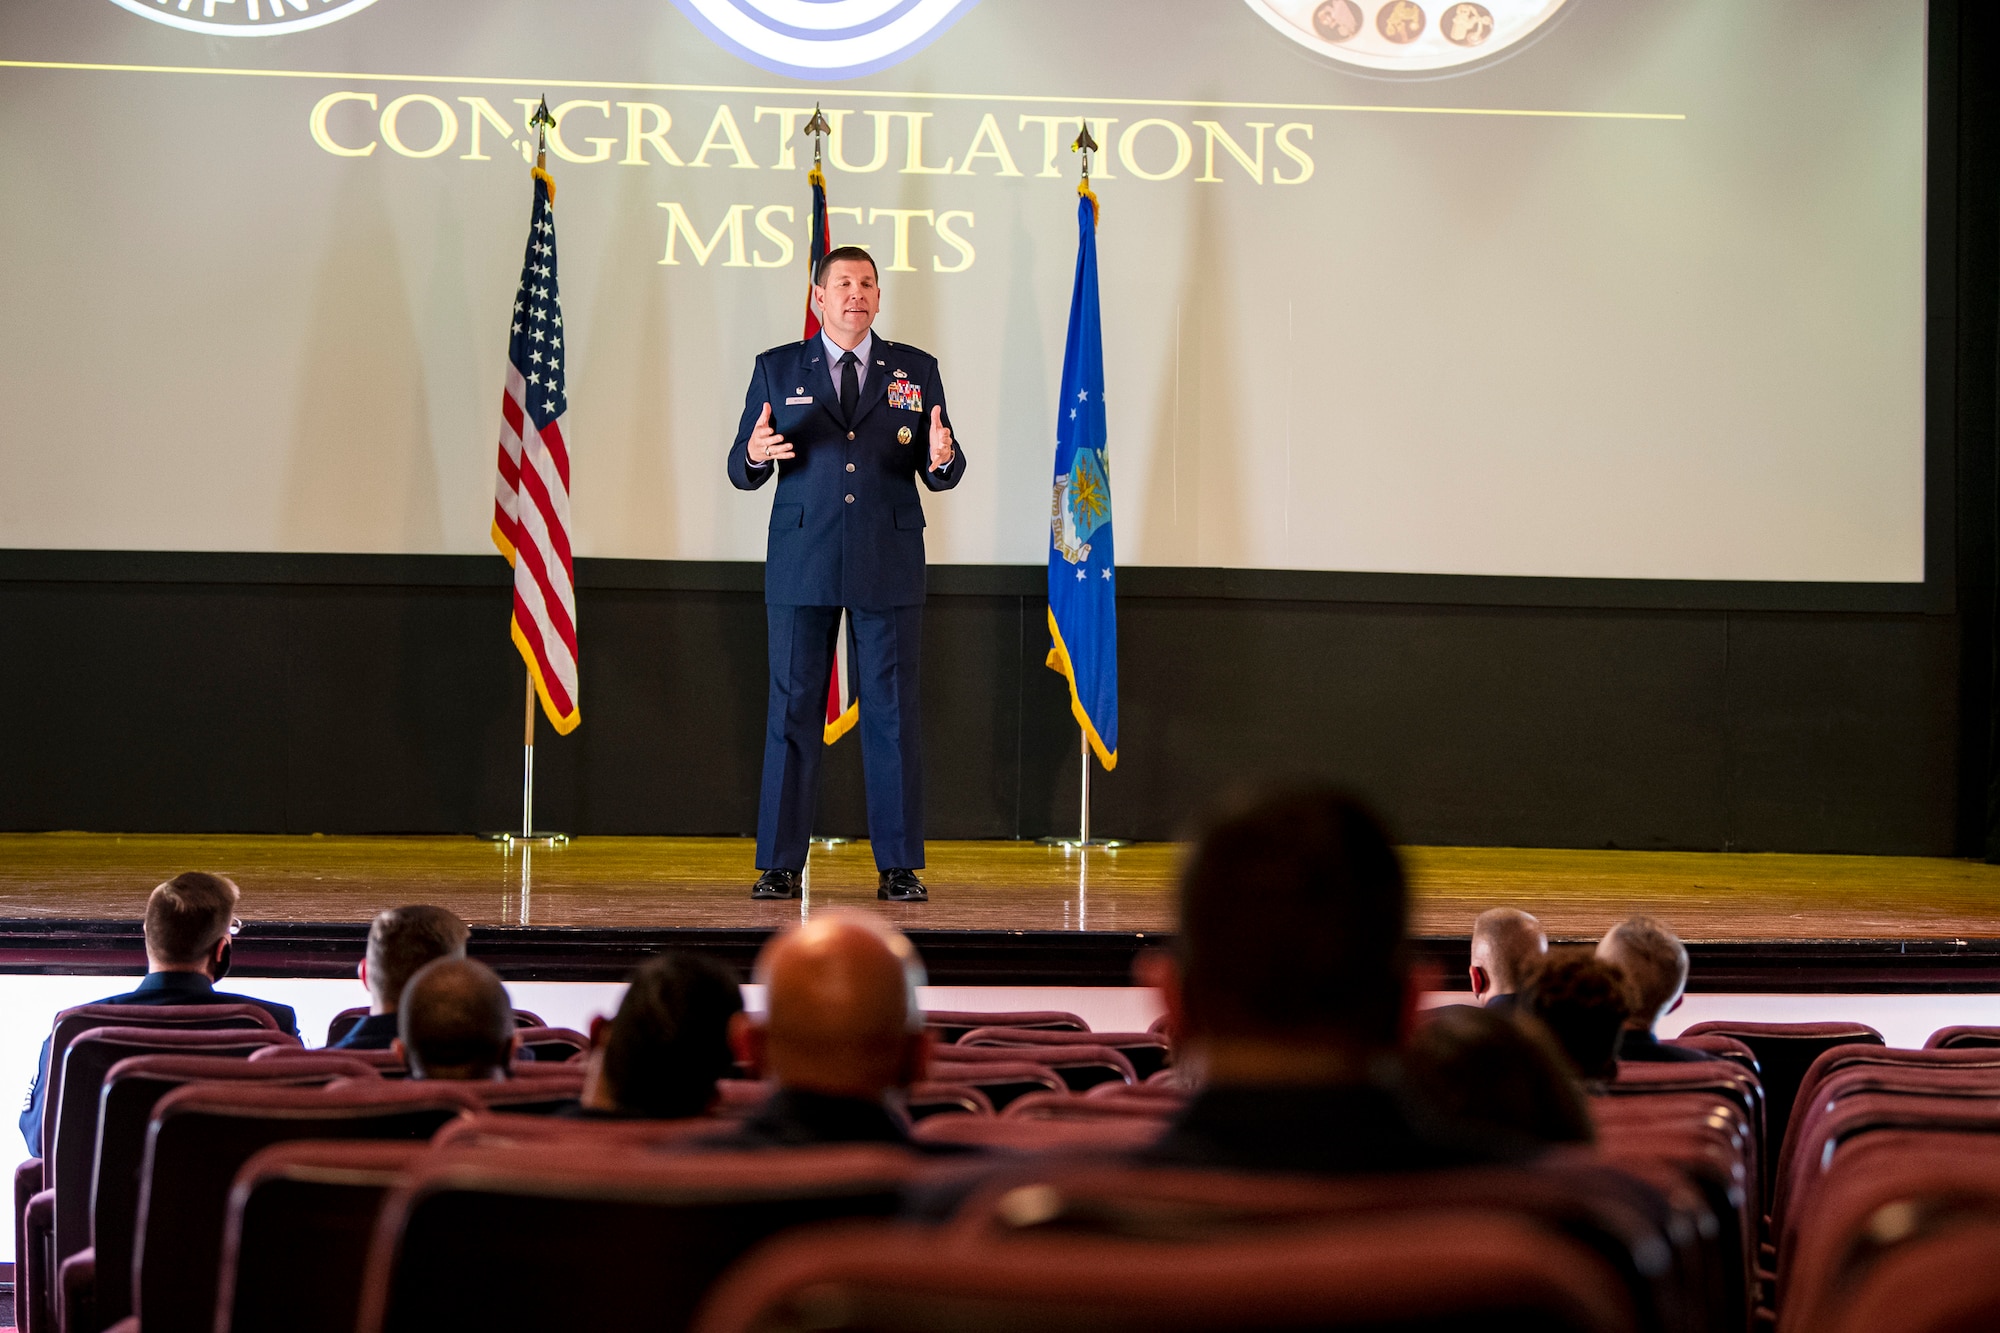 Col. Kurt Wendt, 501st Combat Support Wing commander, speaks during a senior noncommissioned officer induction ceremony at RAF Alconbury, England, Aug. 14, 2020. The ceremony honored and celebrated the Airmen who have earned the rank of Master Sgt. (U.S. Air force photo by Senior Airman Eugene Oliver)